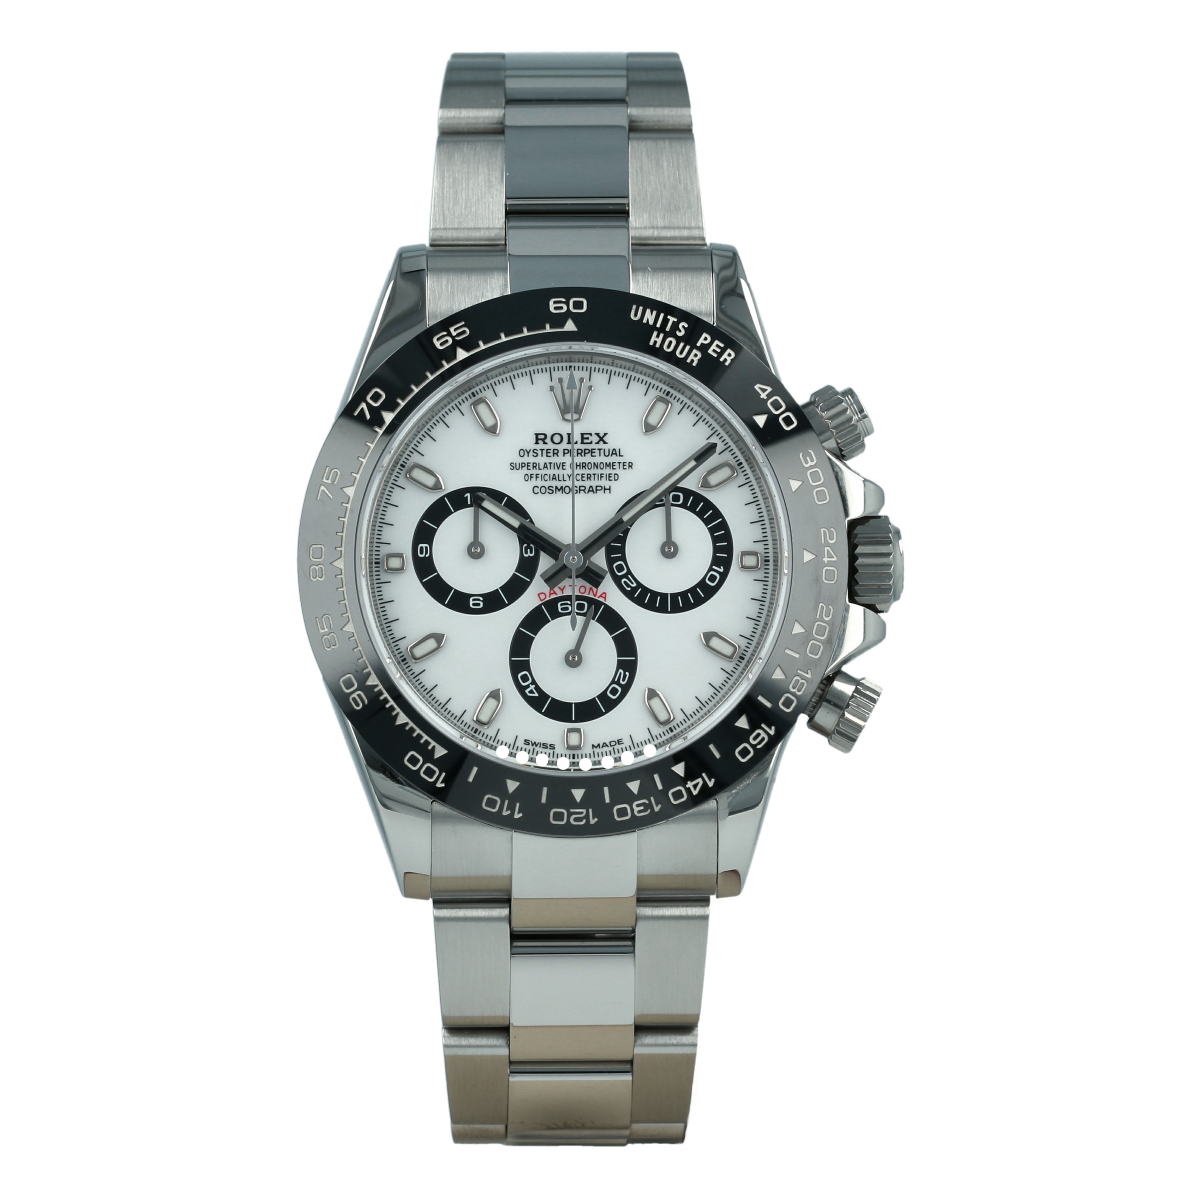 Rolex Cosmograph Daytona 116500LN White Dial | Buy pre-owned Rolex watch